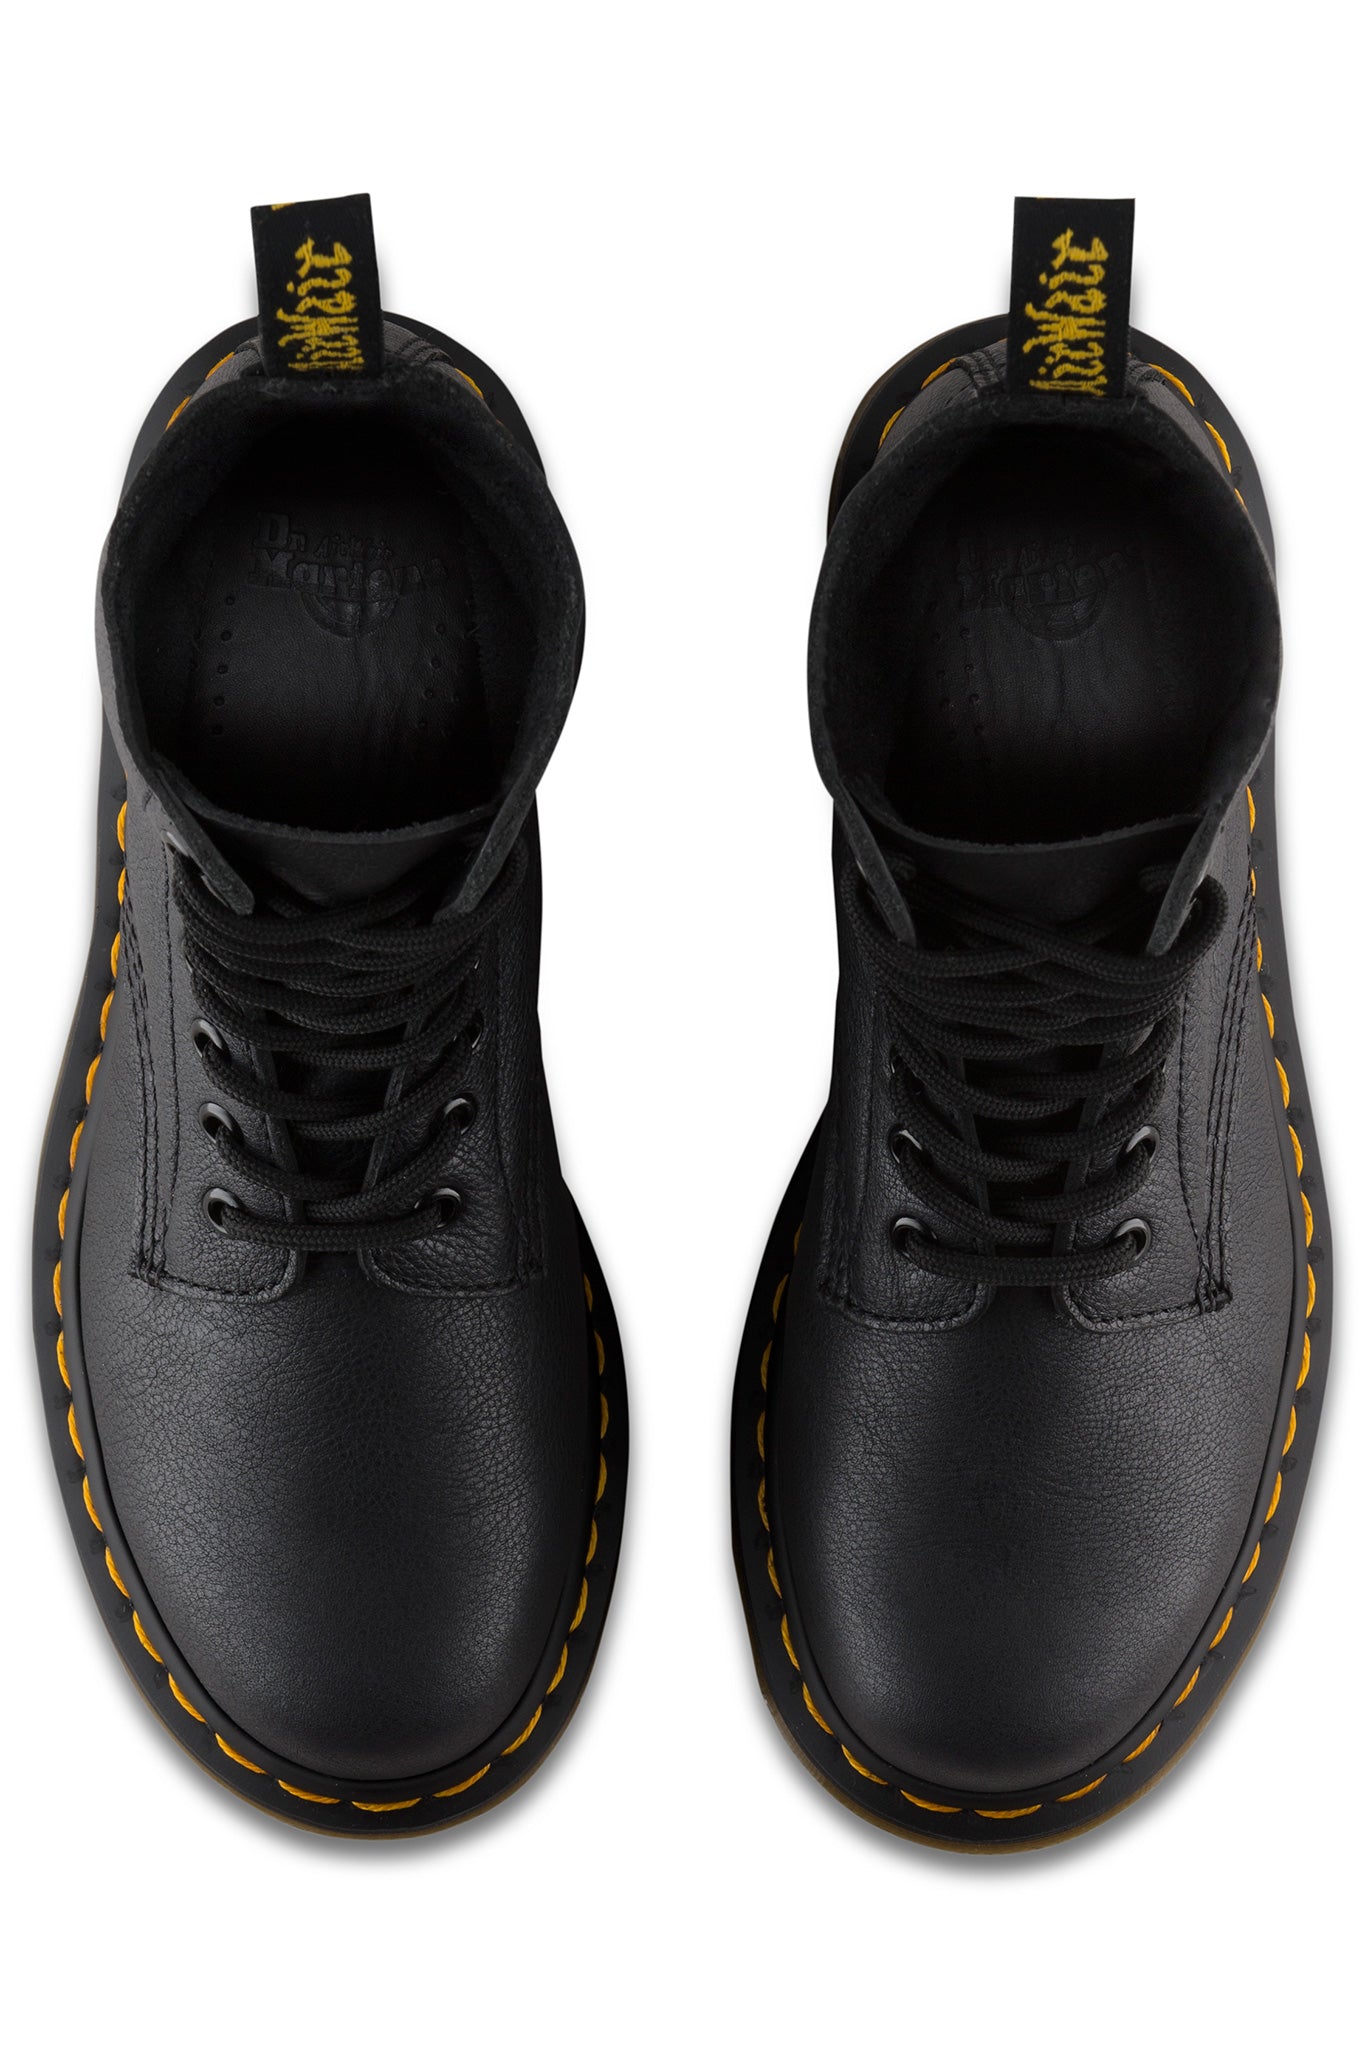 1460 Pascal Virginia Leather Boot Footwear Dr. Martens   